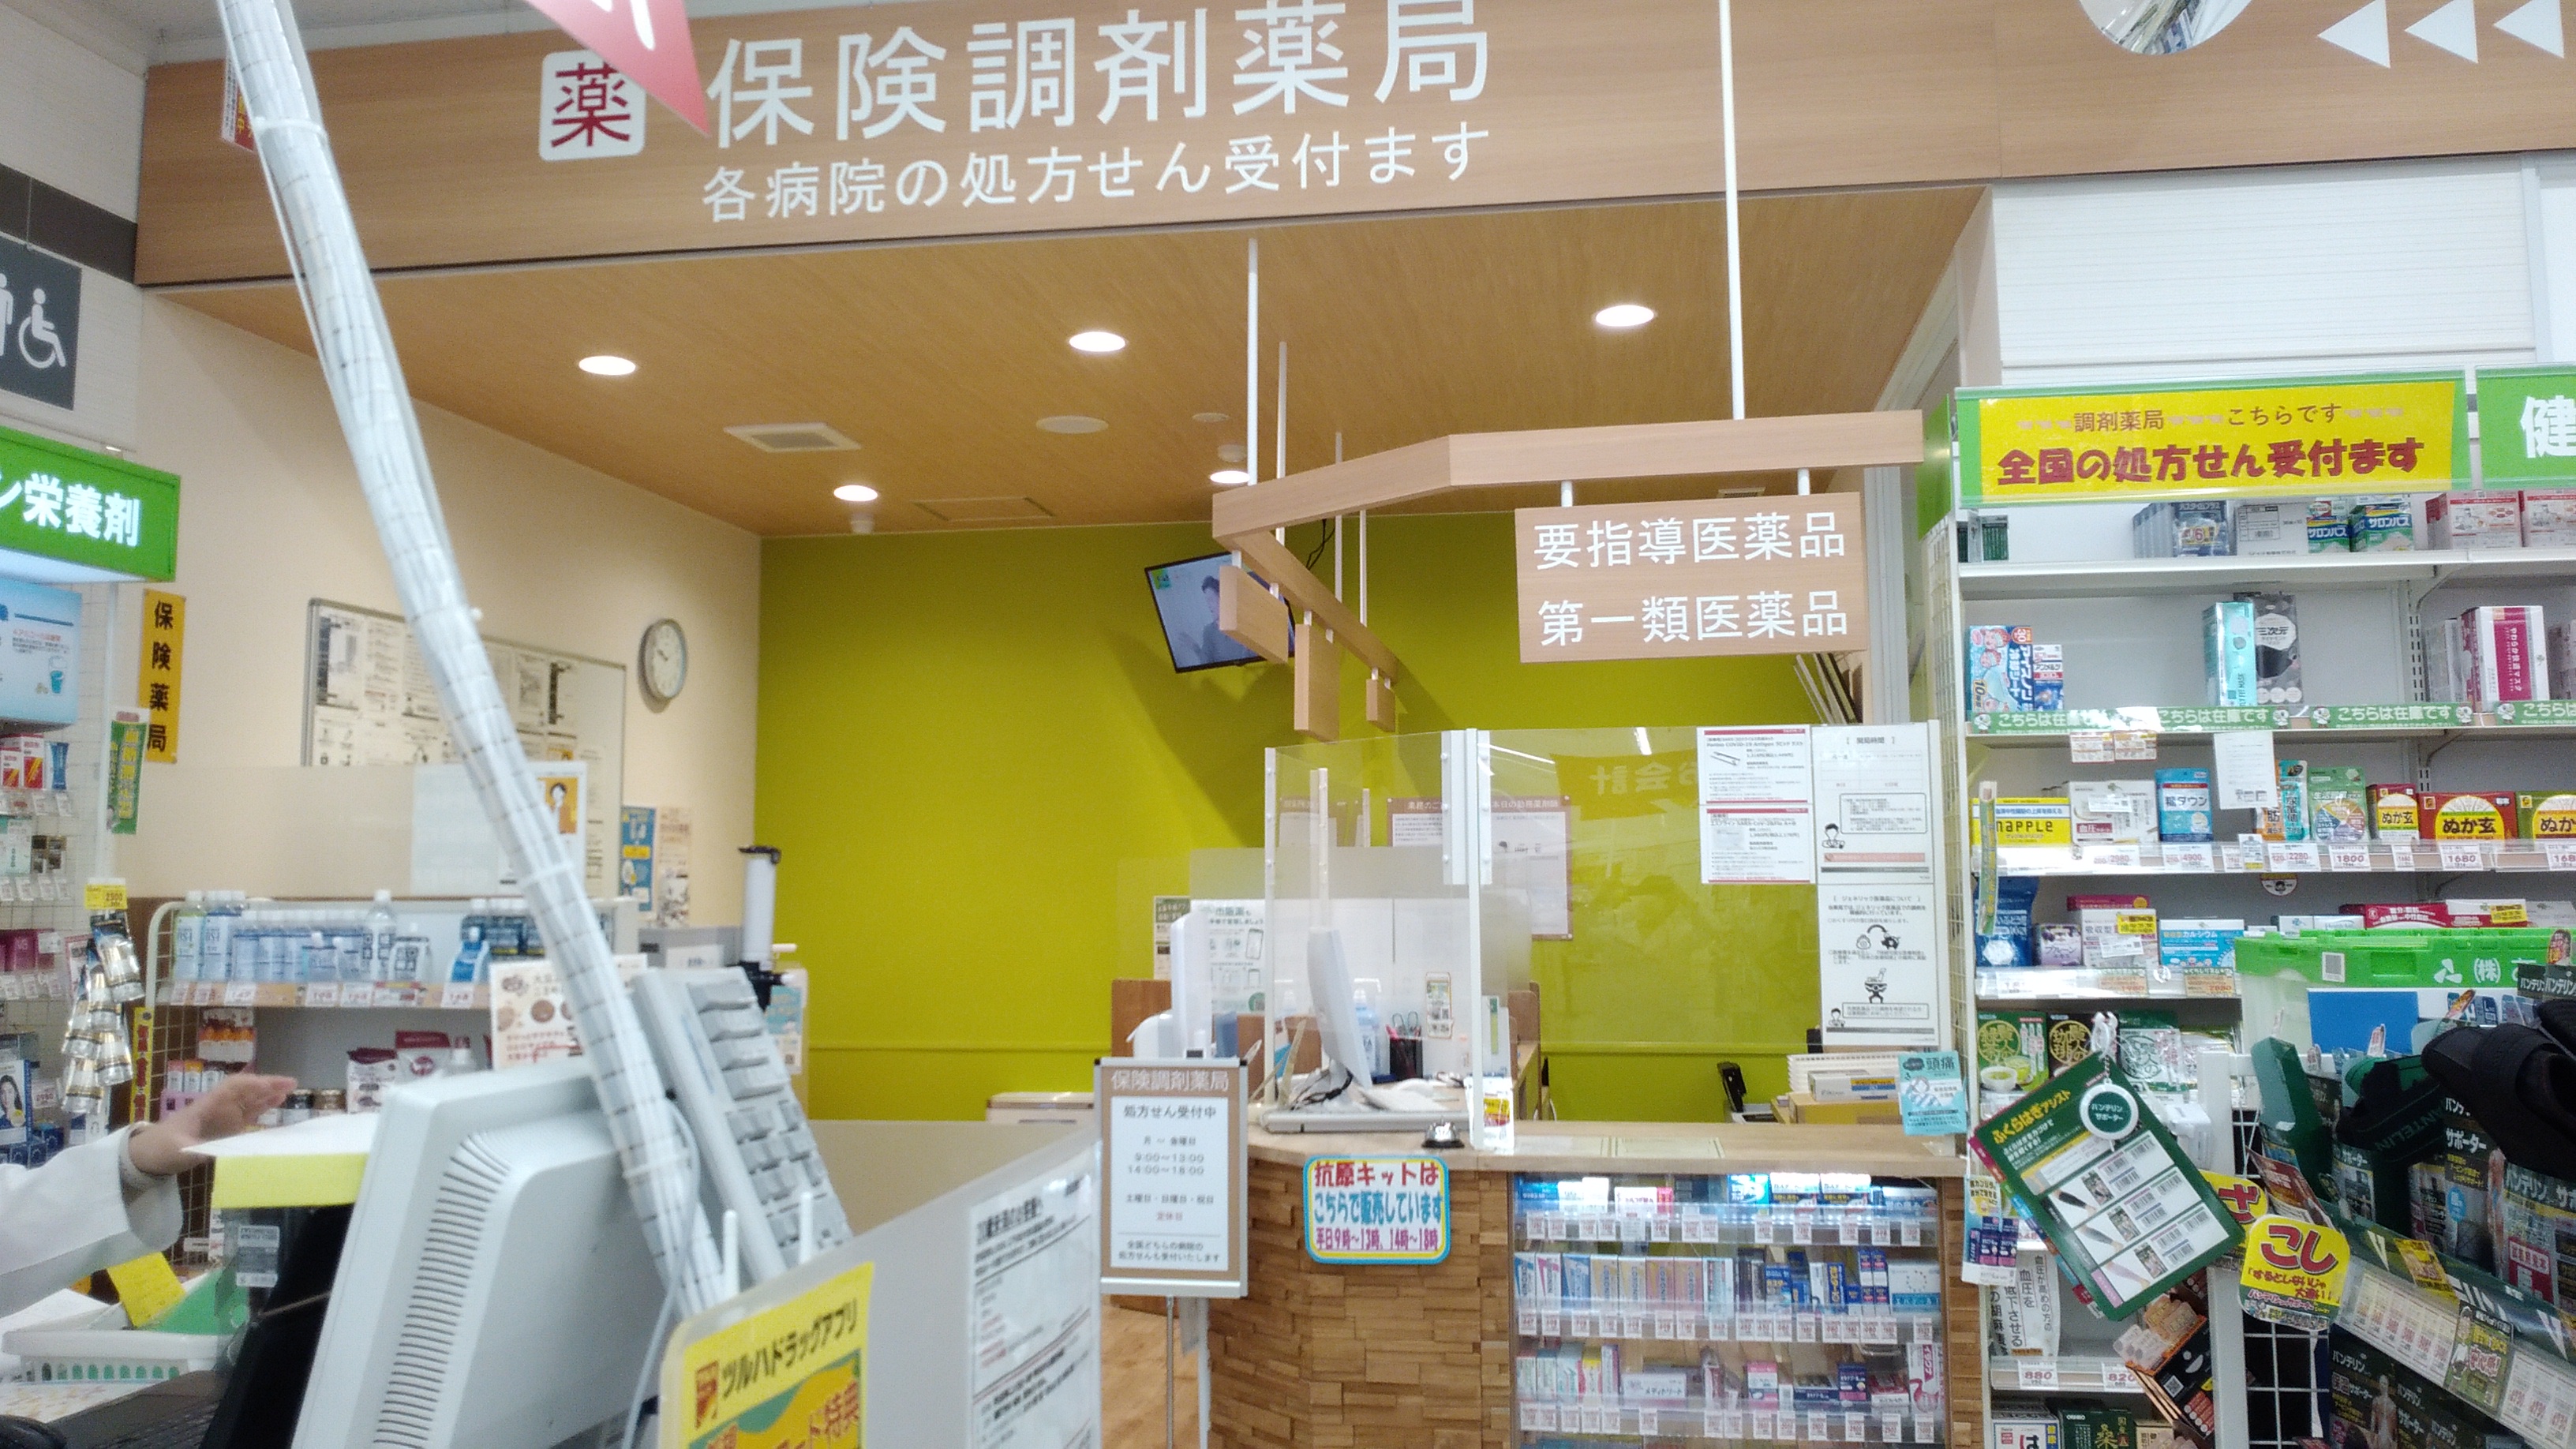 Images 調剤薬局ツルハドラッグ 弘前駅前店